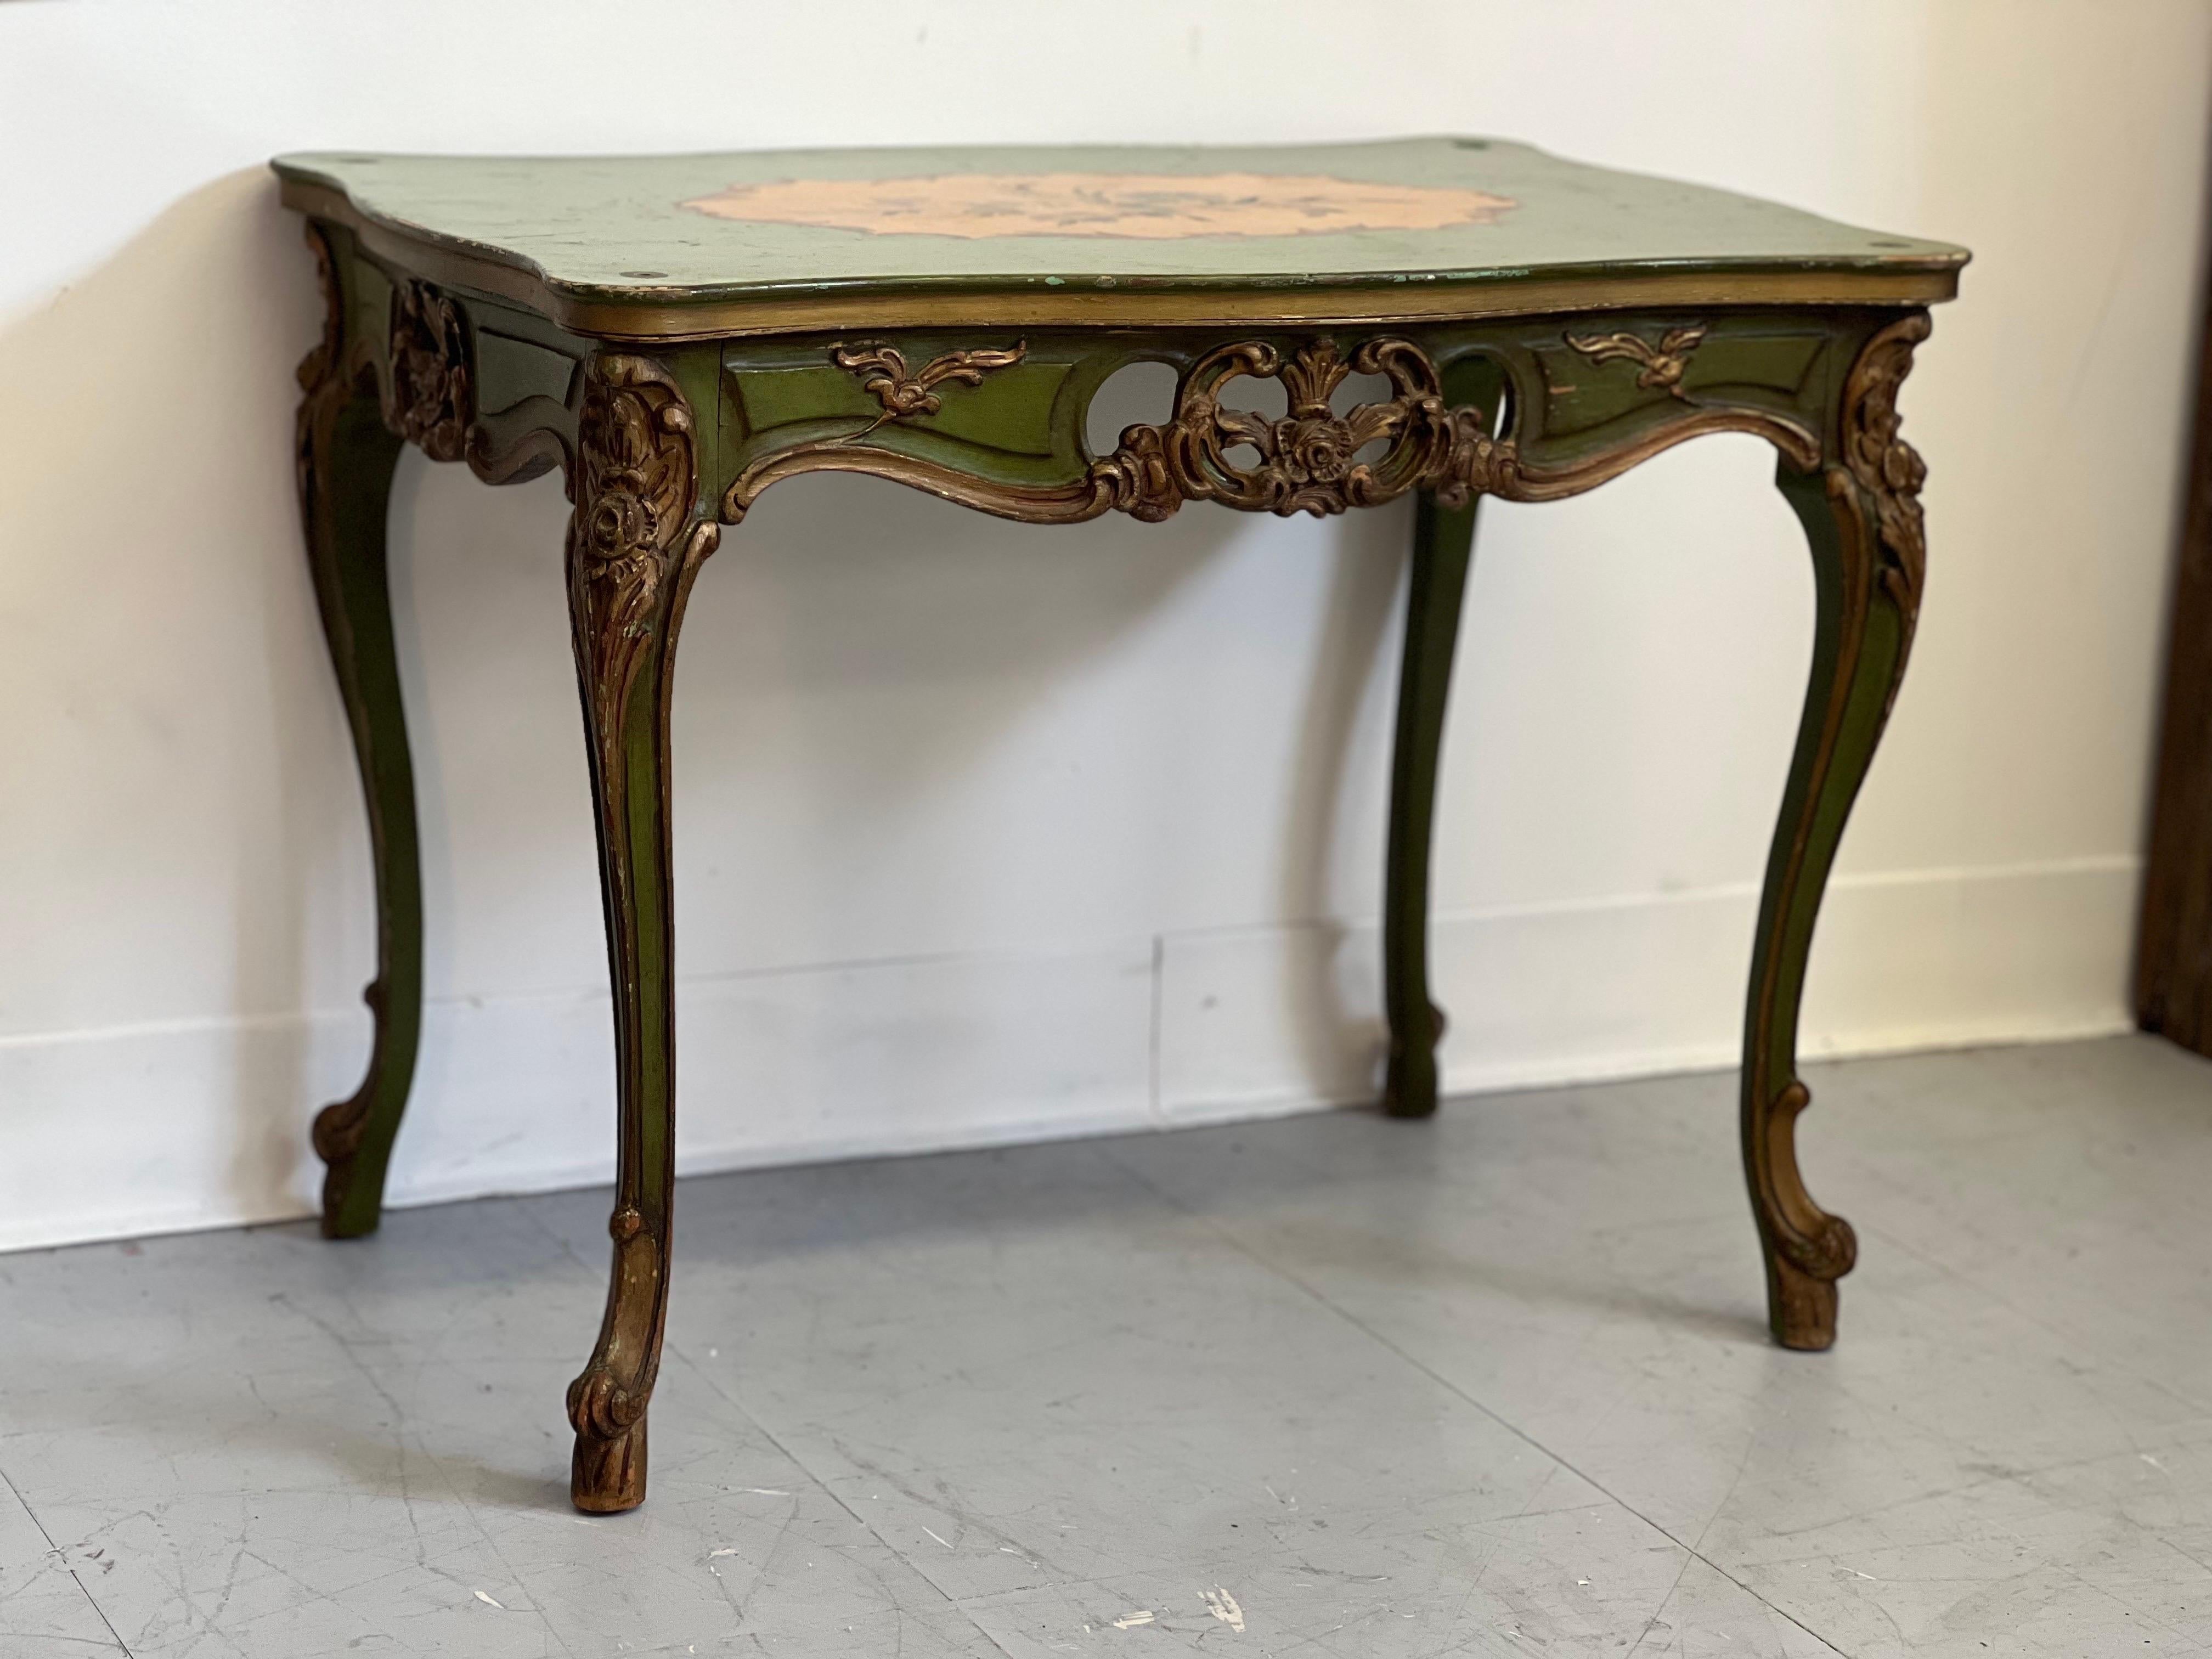 Wood Antique French Provincial Accent Table with Hand Painted Details. Made In Italy. For Sale